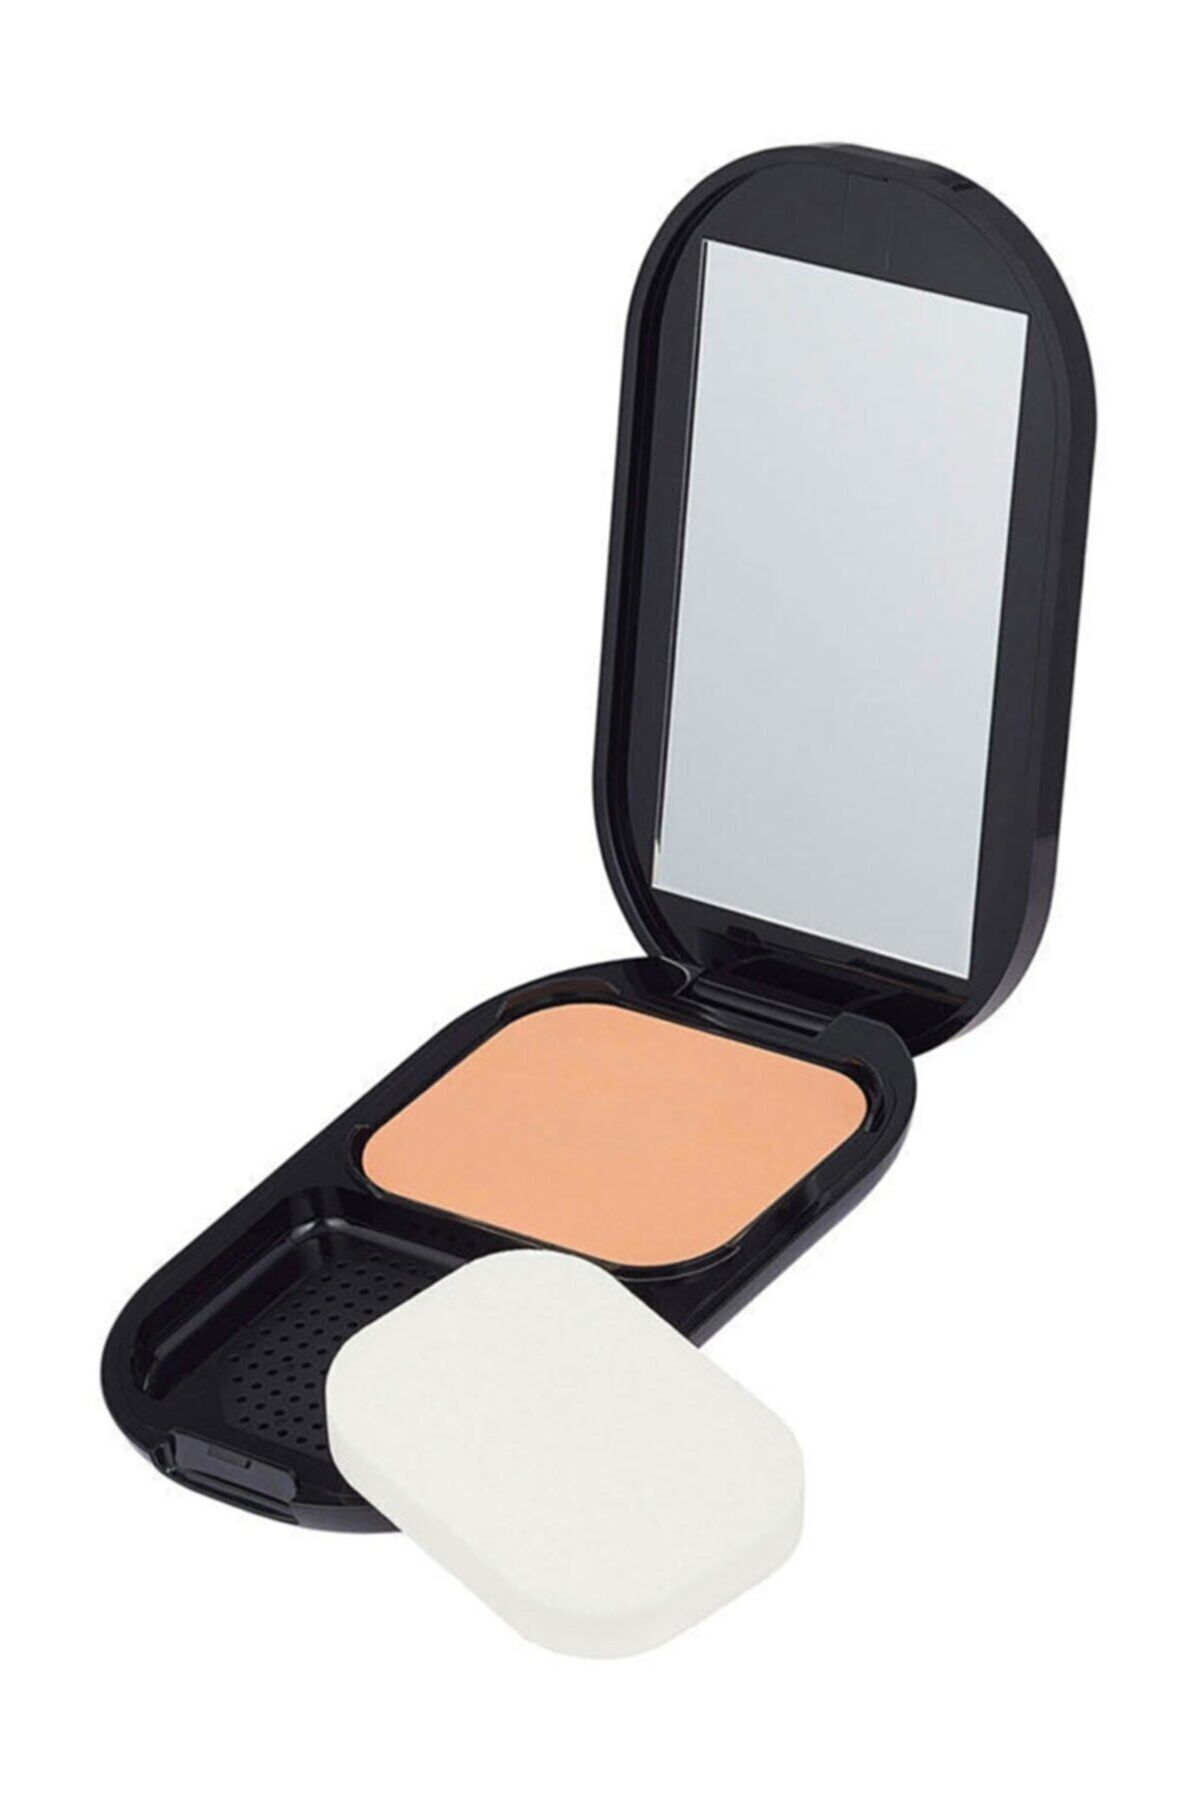 Max Factor Pudra - Facefinity Compact Powder 005 Sand 8005610545035